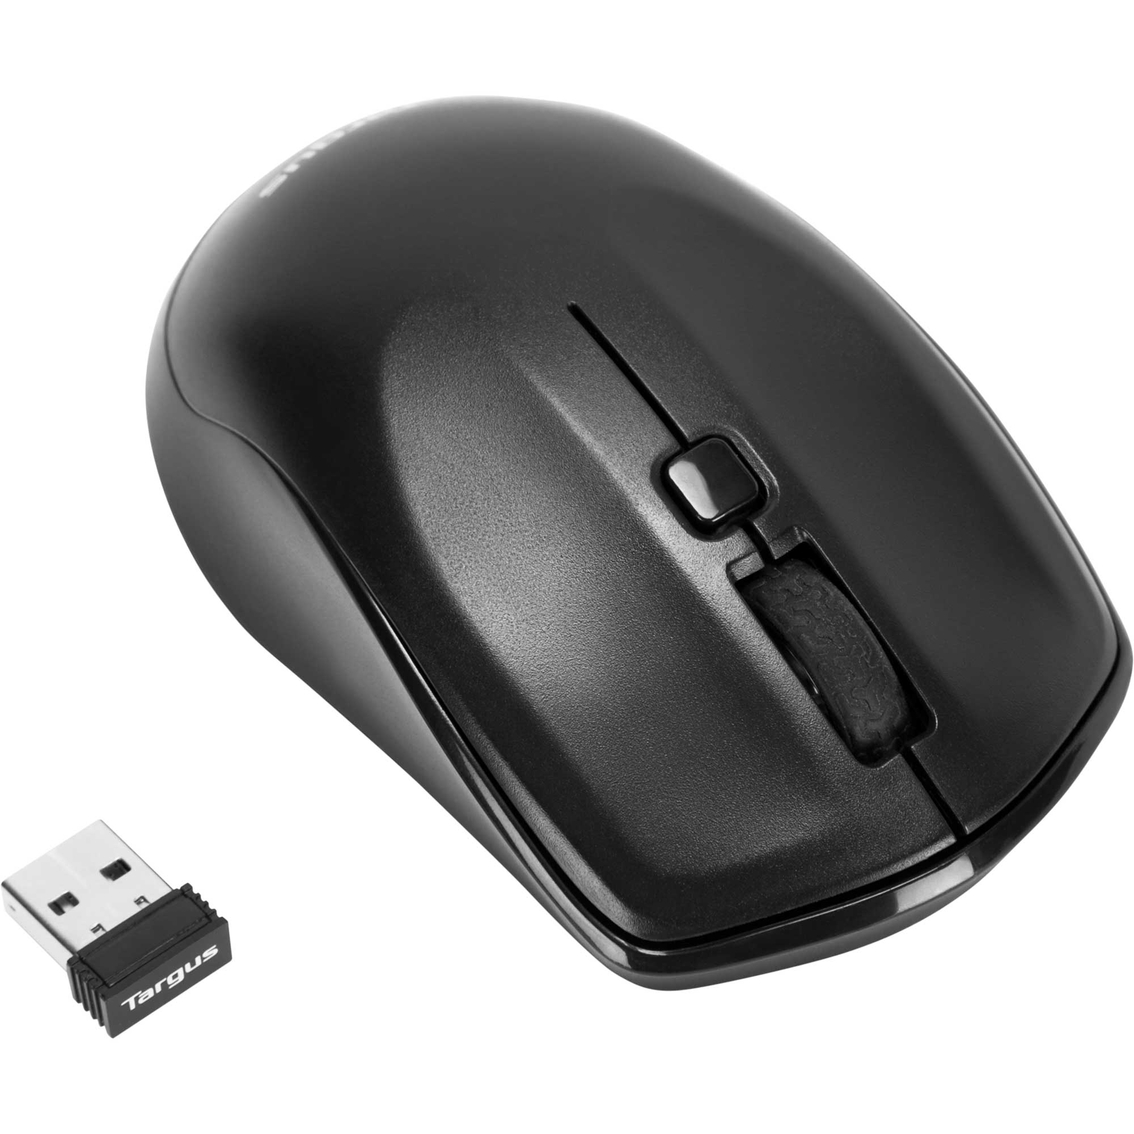 Targus Wireless Keyboard and Mouse Combo - Image 3 of 6